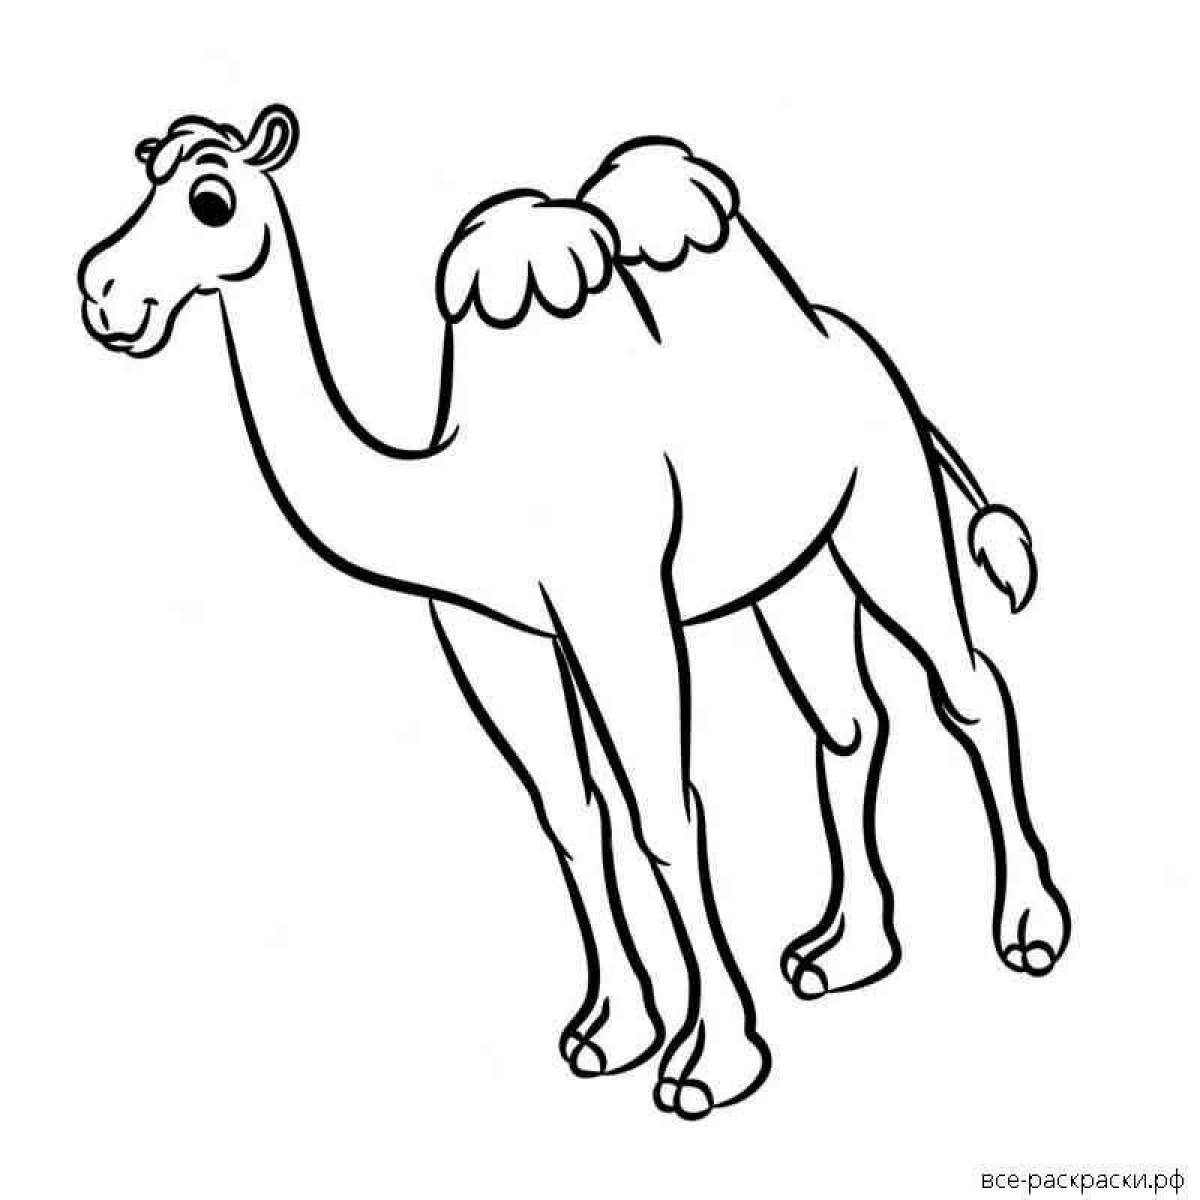 Shiny camel coloring book for kids